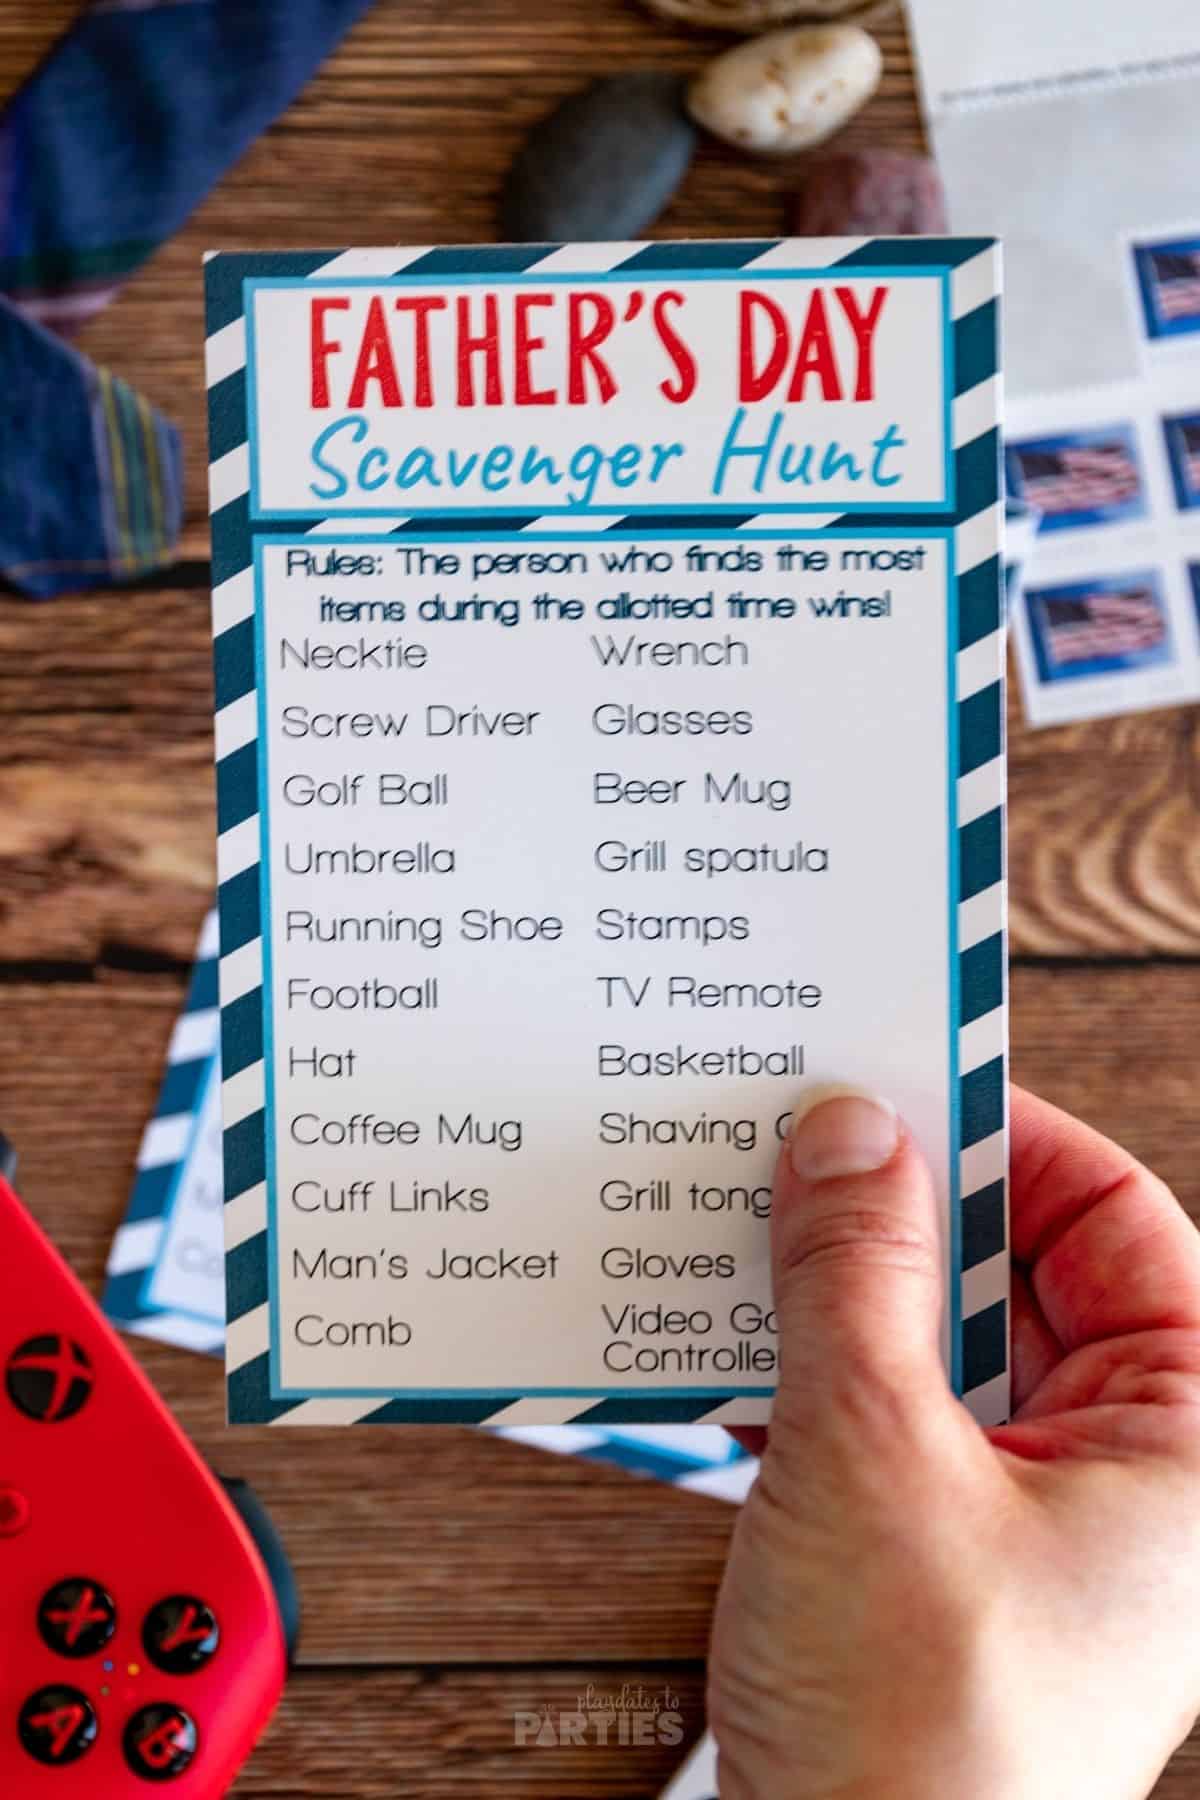 A woman's hand holding a Father's Day Scavenger hunt card.